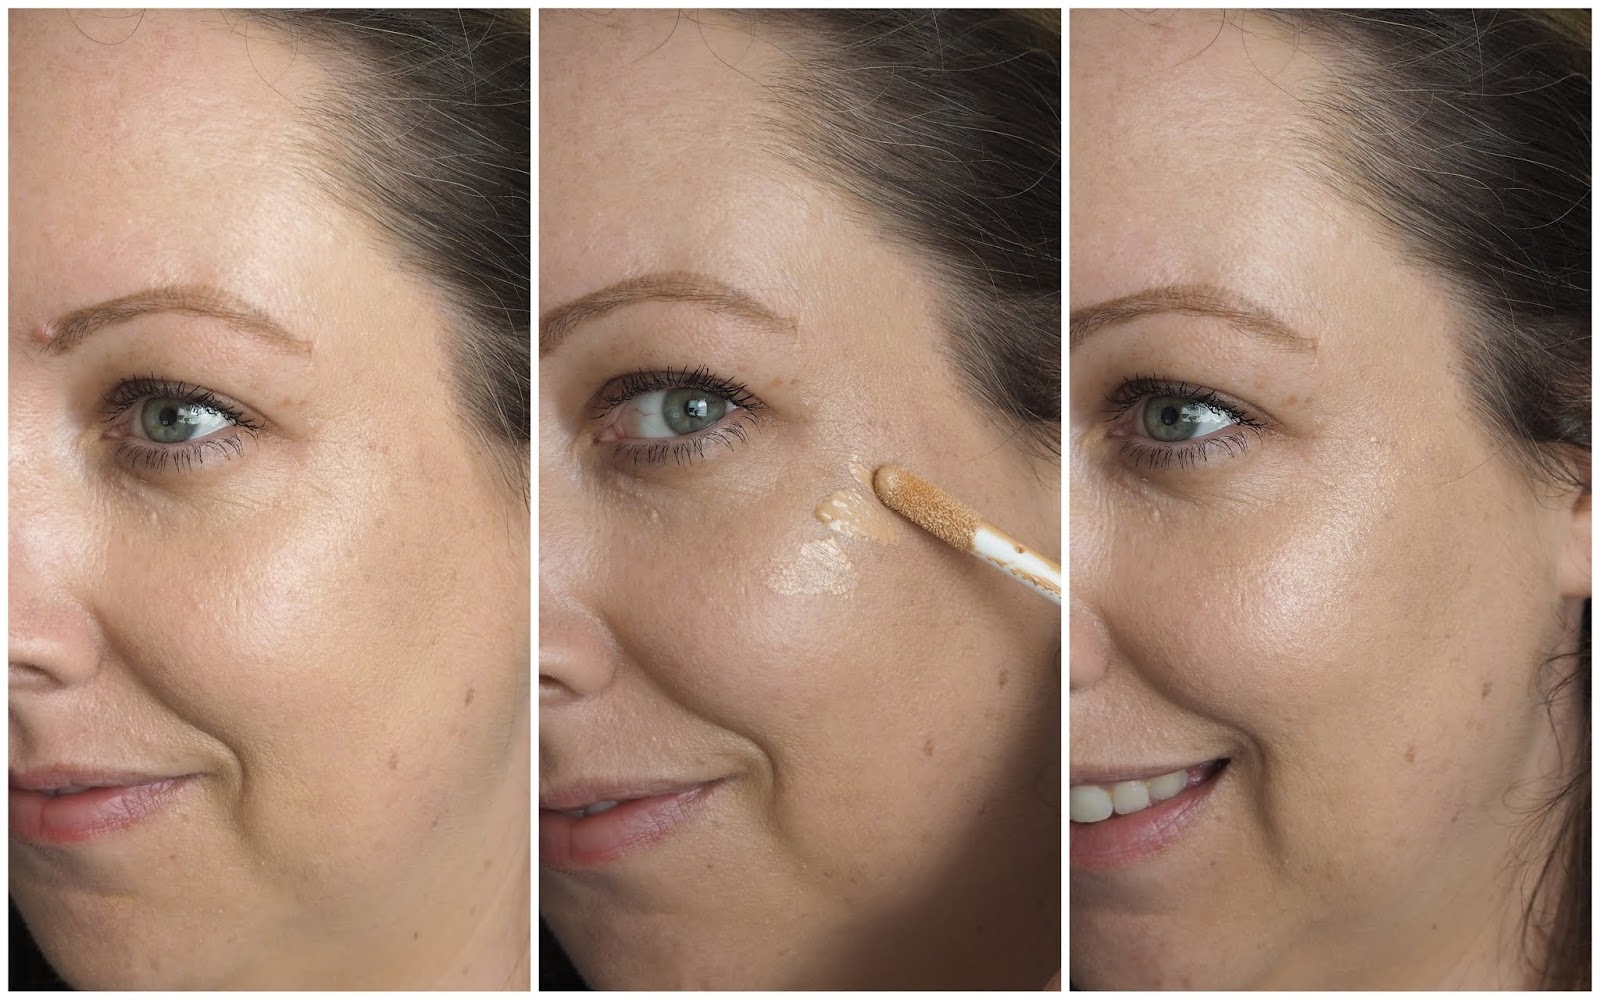 Charlotte Tilbury Hollywood Flawless Filter Review